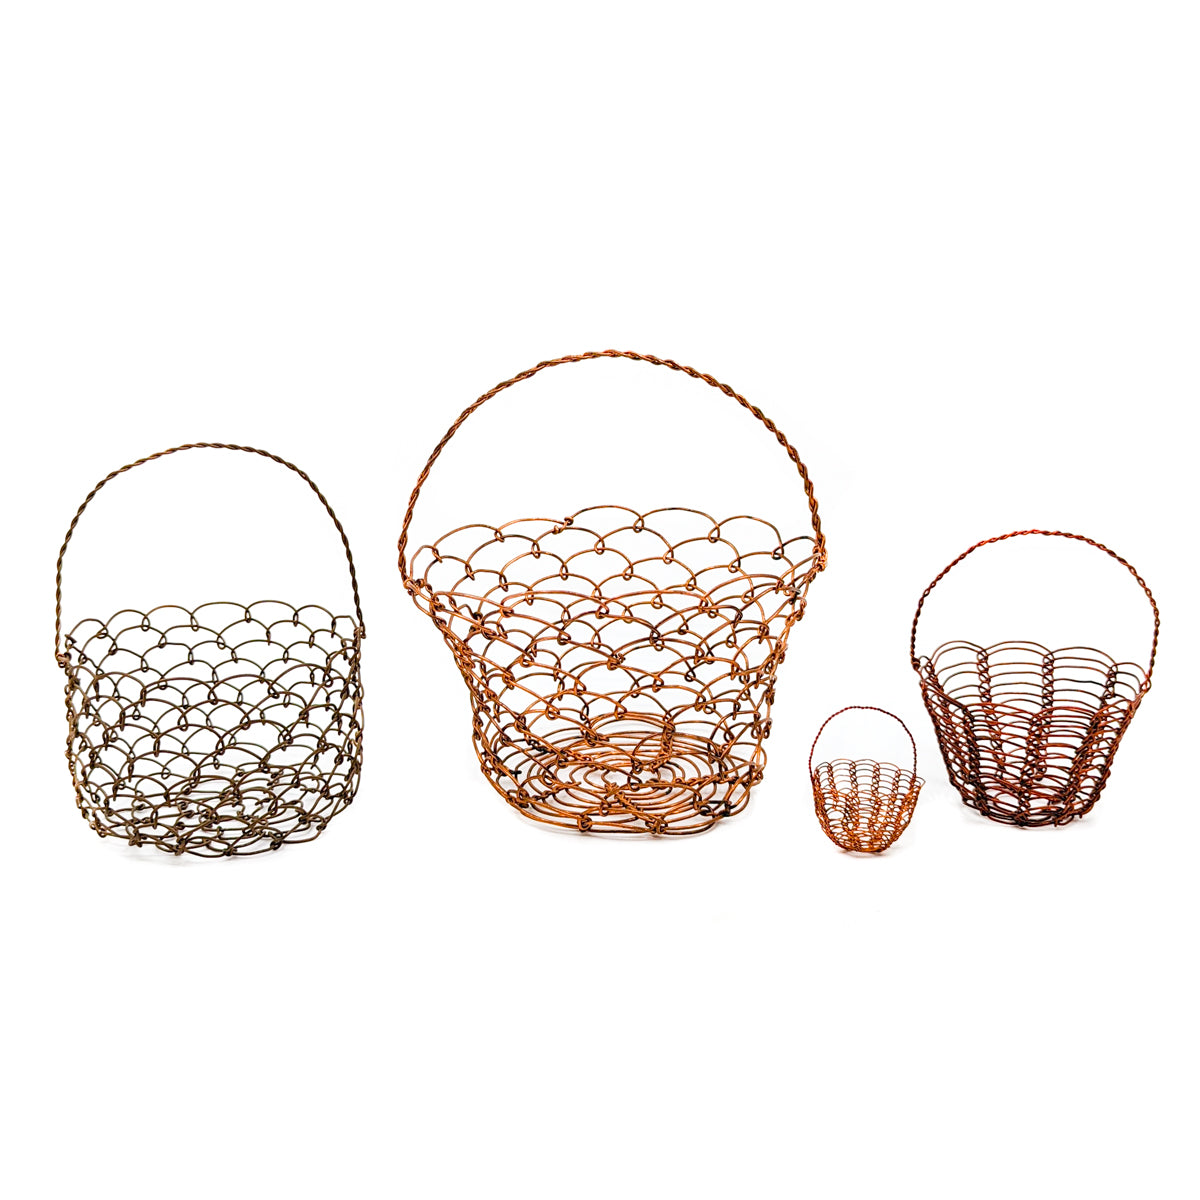 Yoreme (Mayo) Wire Basket - Available In Assorted Sizes